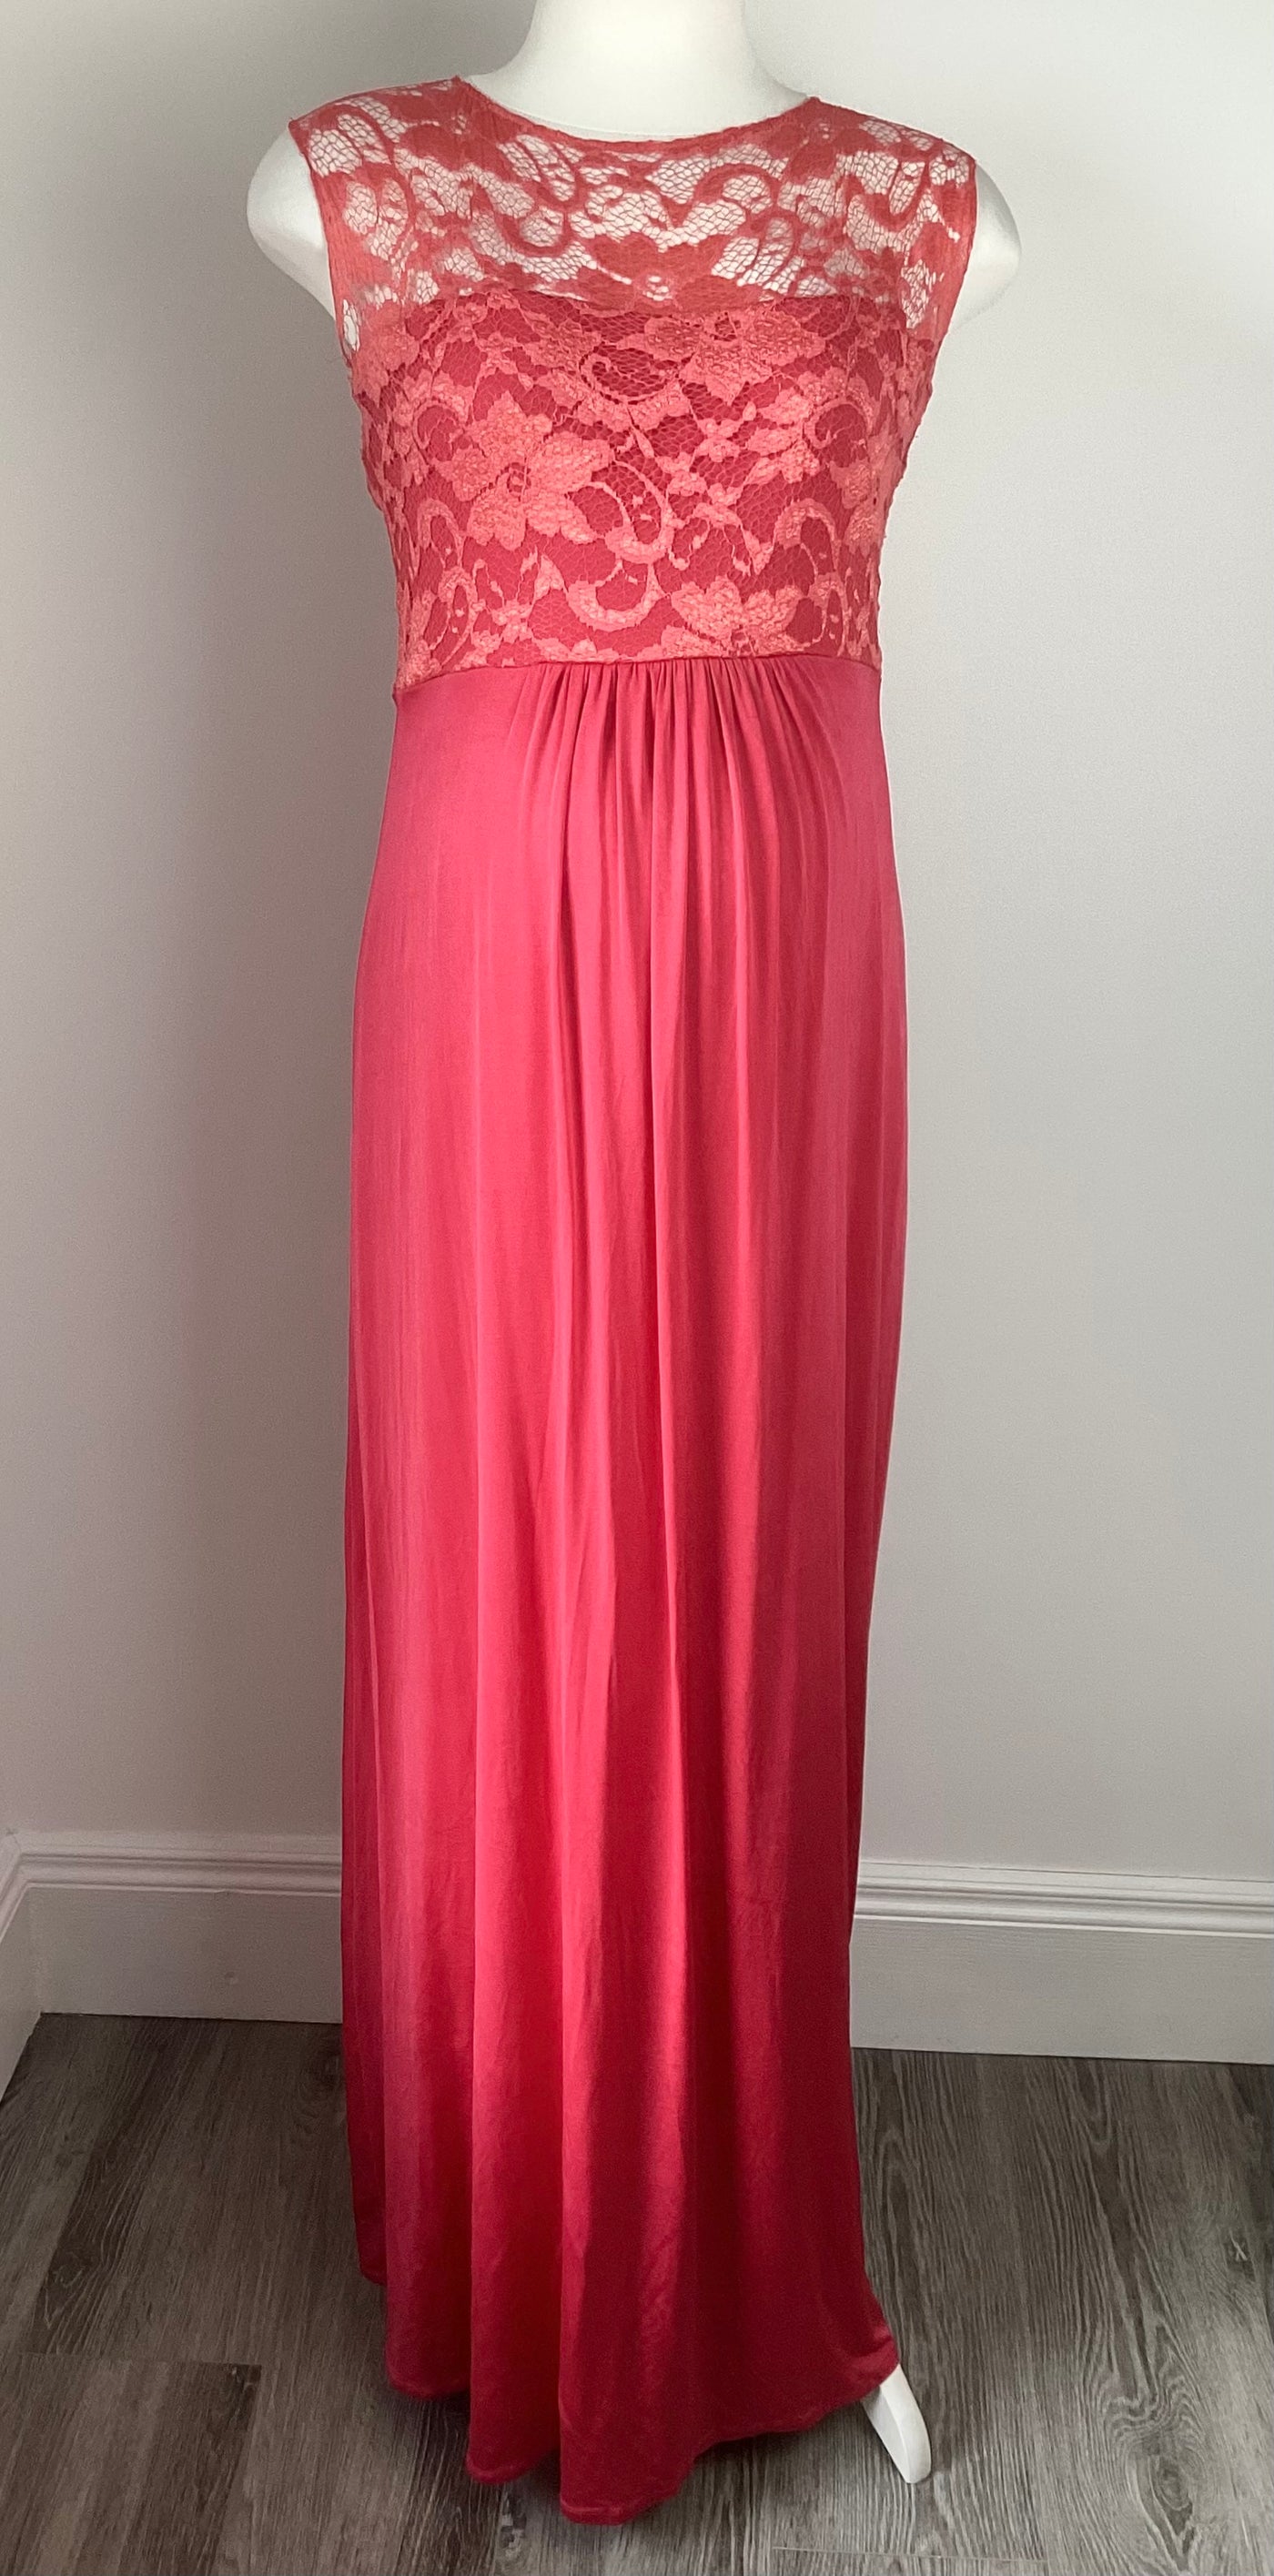 Tiffany Rose Valencia gown in sunset red - Size 4 (Approx UK 14/16)